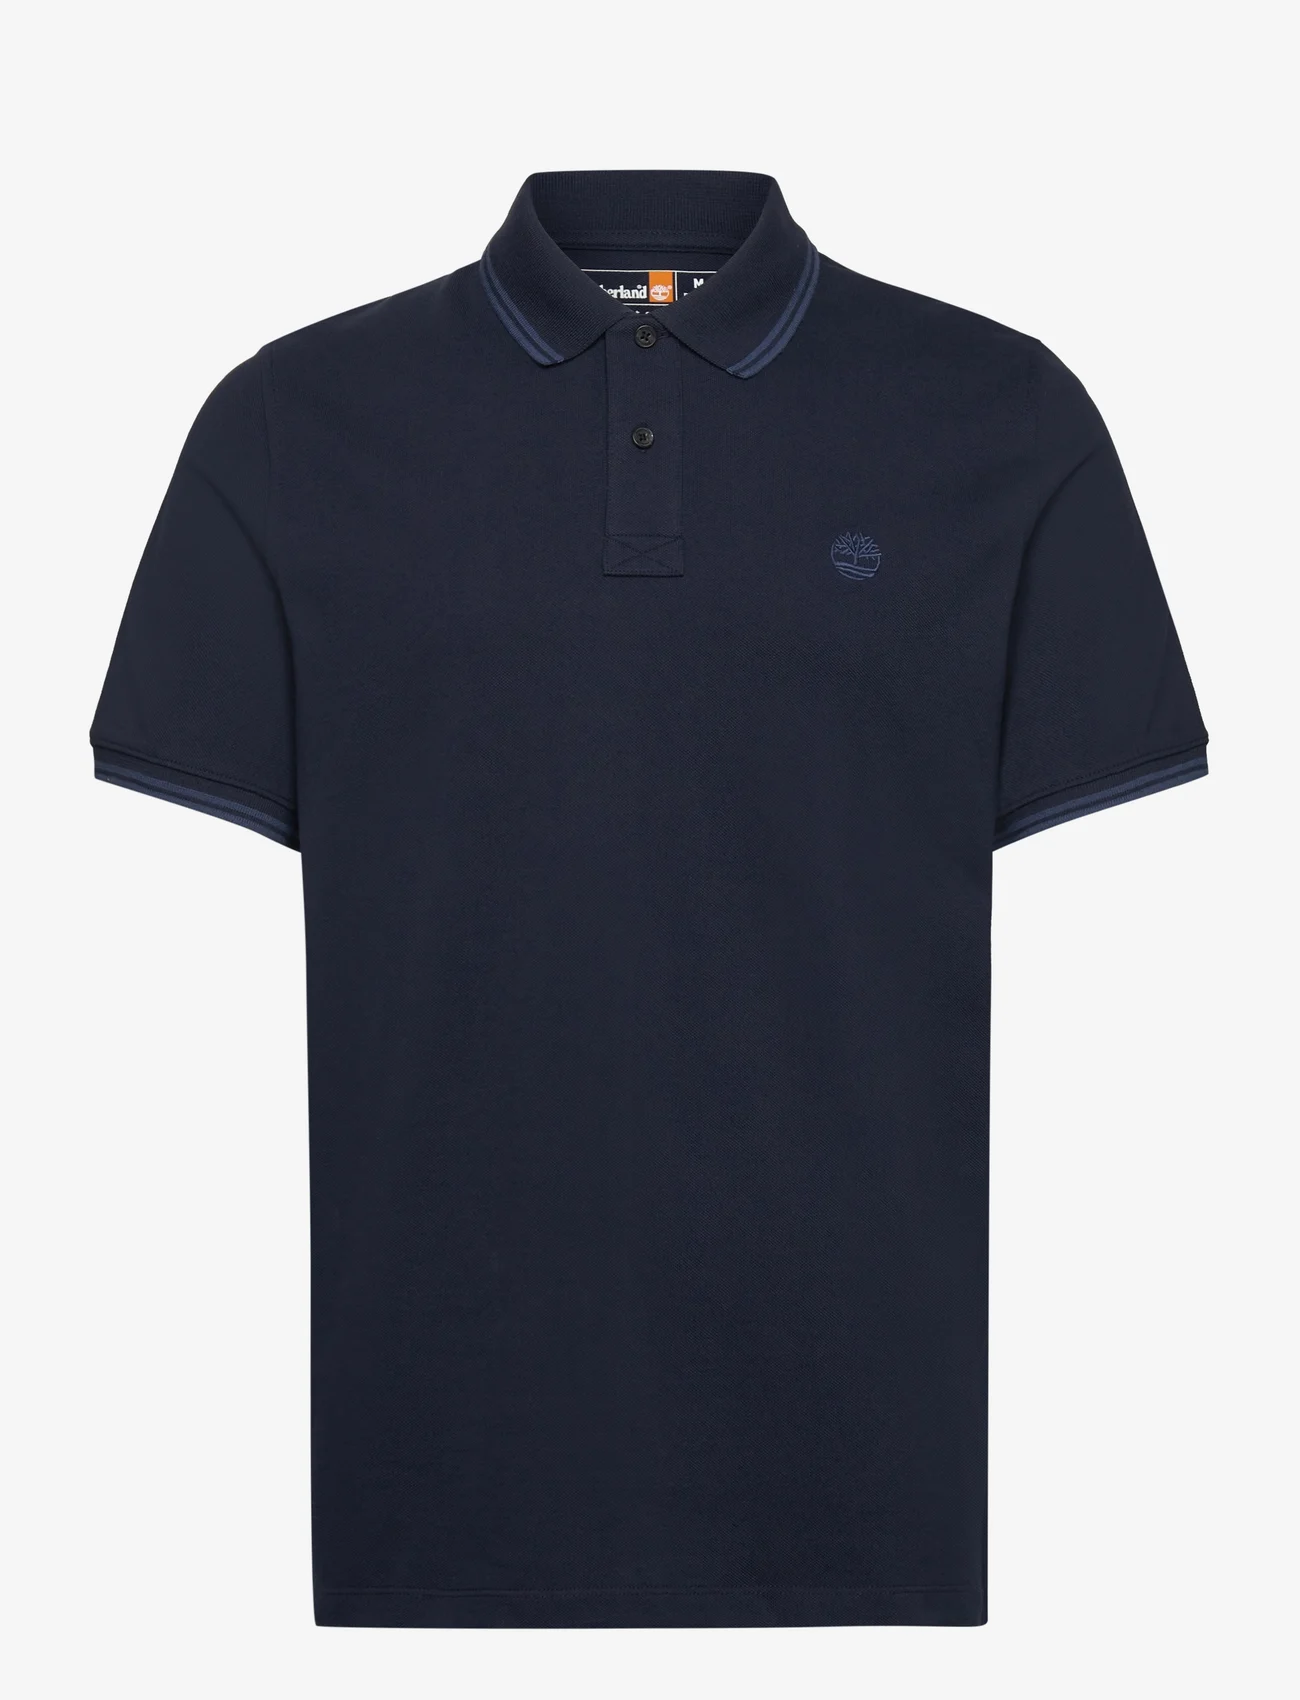 Timberland - MILLERS RIVER Tipped Pique Short Sleeve Polo DARK SAPPHIRE - short-sleeved polos - dark sapphire - 0